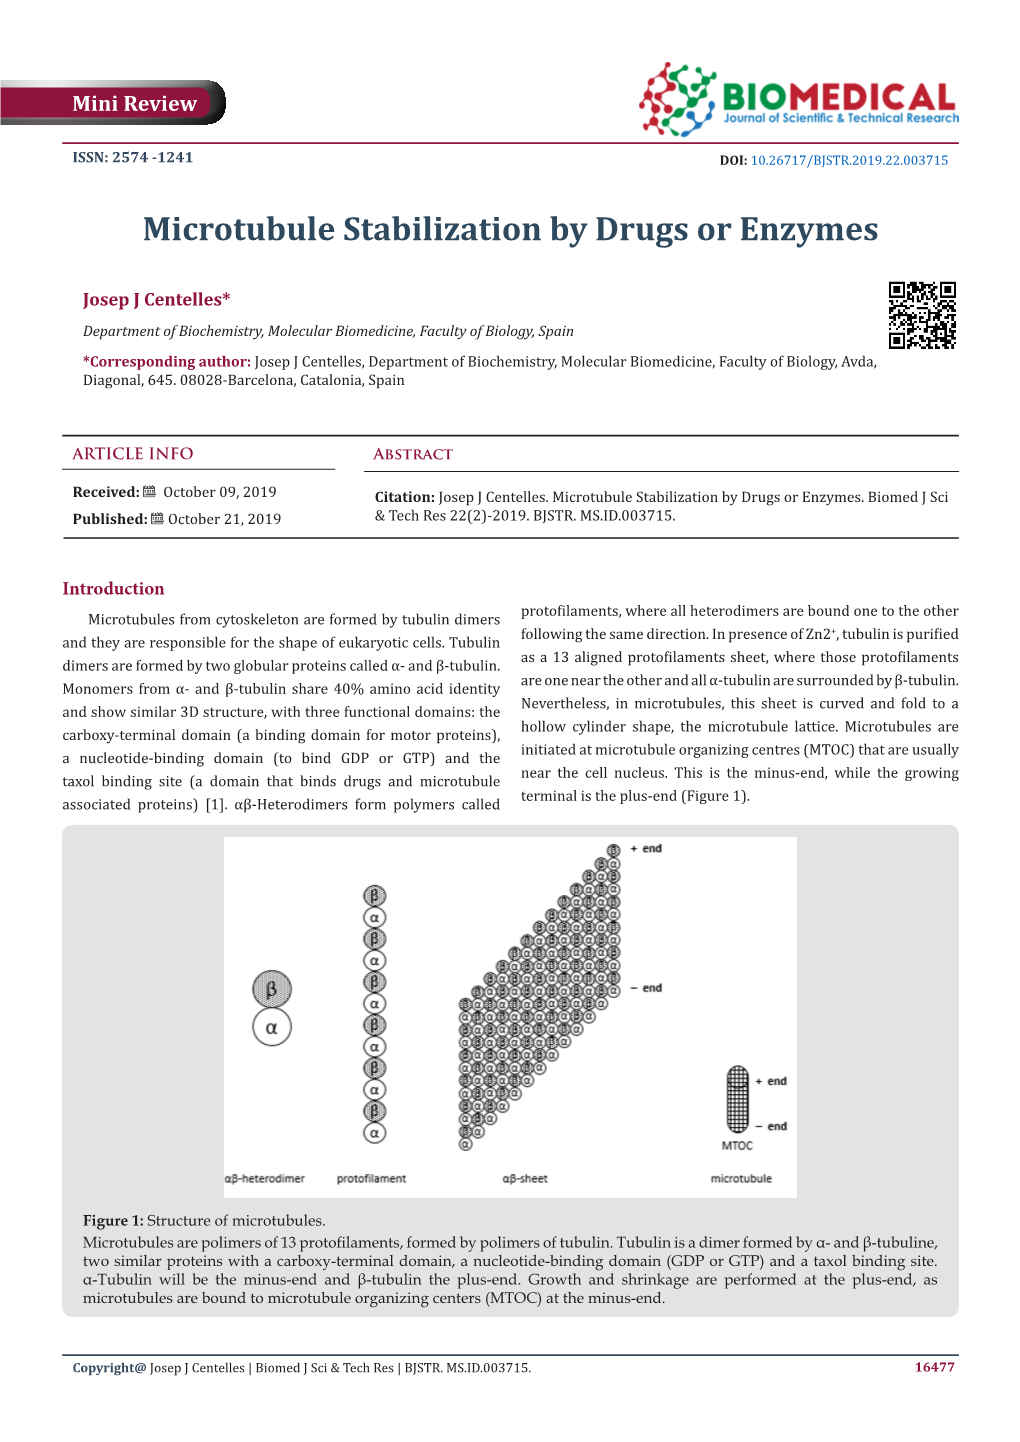 Microtubule Stabilization by Drugs Or Enzymes